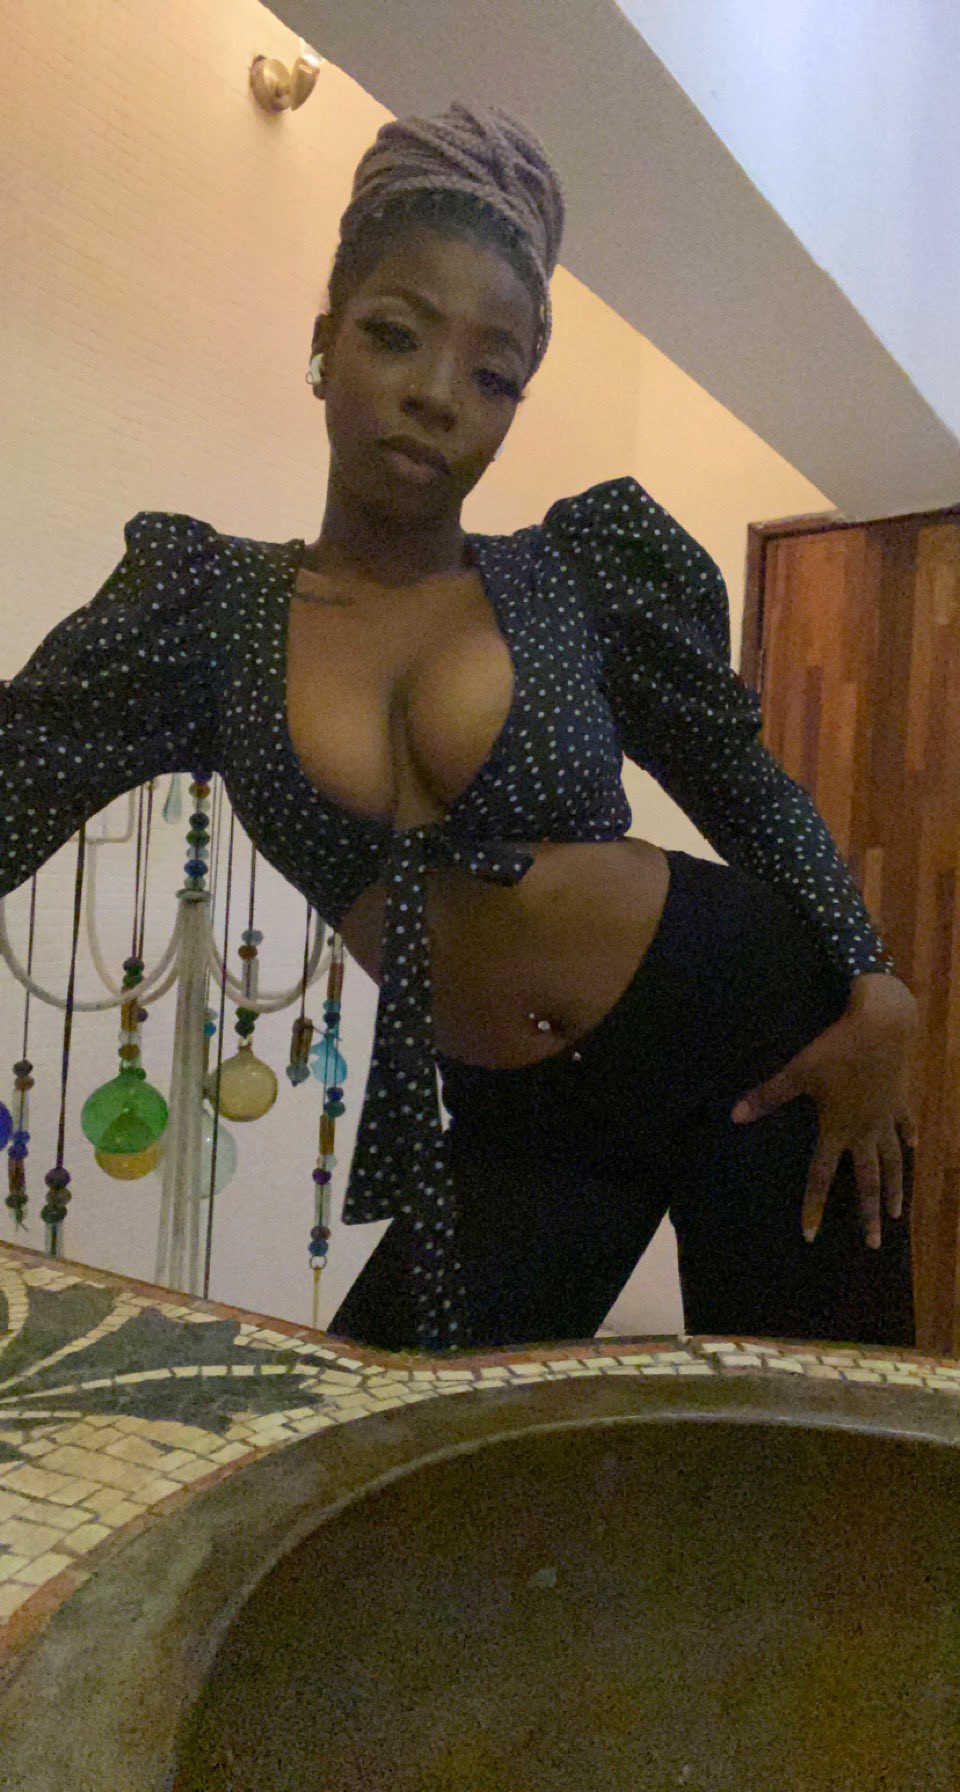 Twitter influencer calls out Lagos restaurant for not allowing her in over her outfit